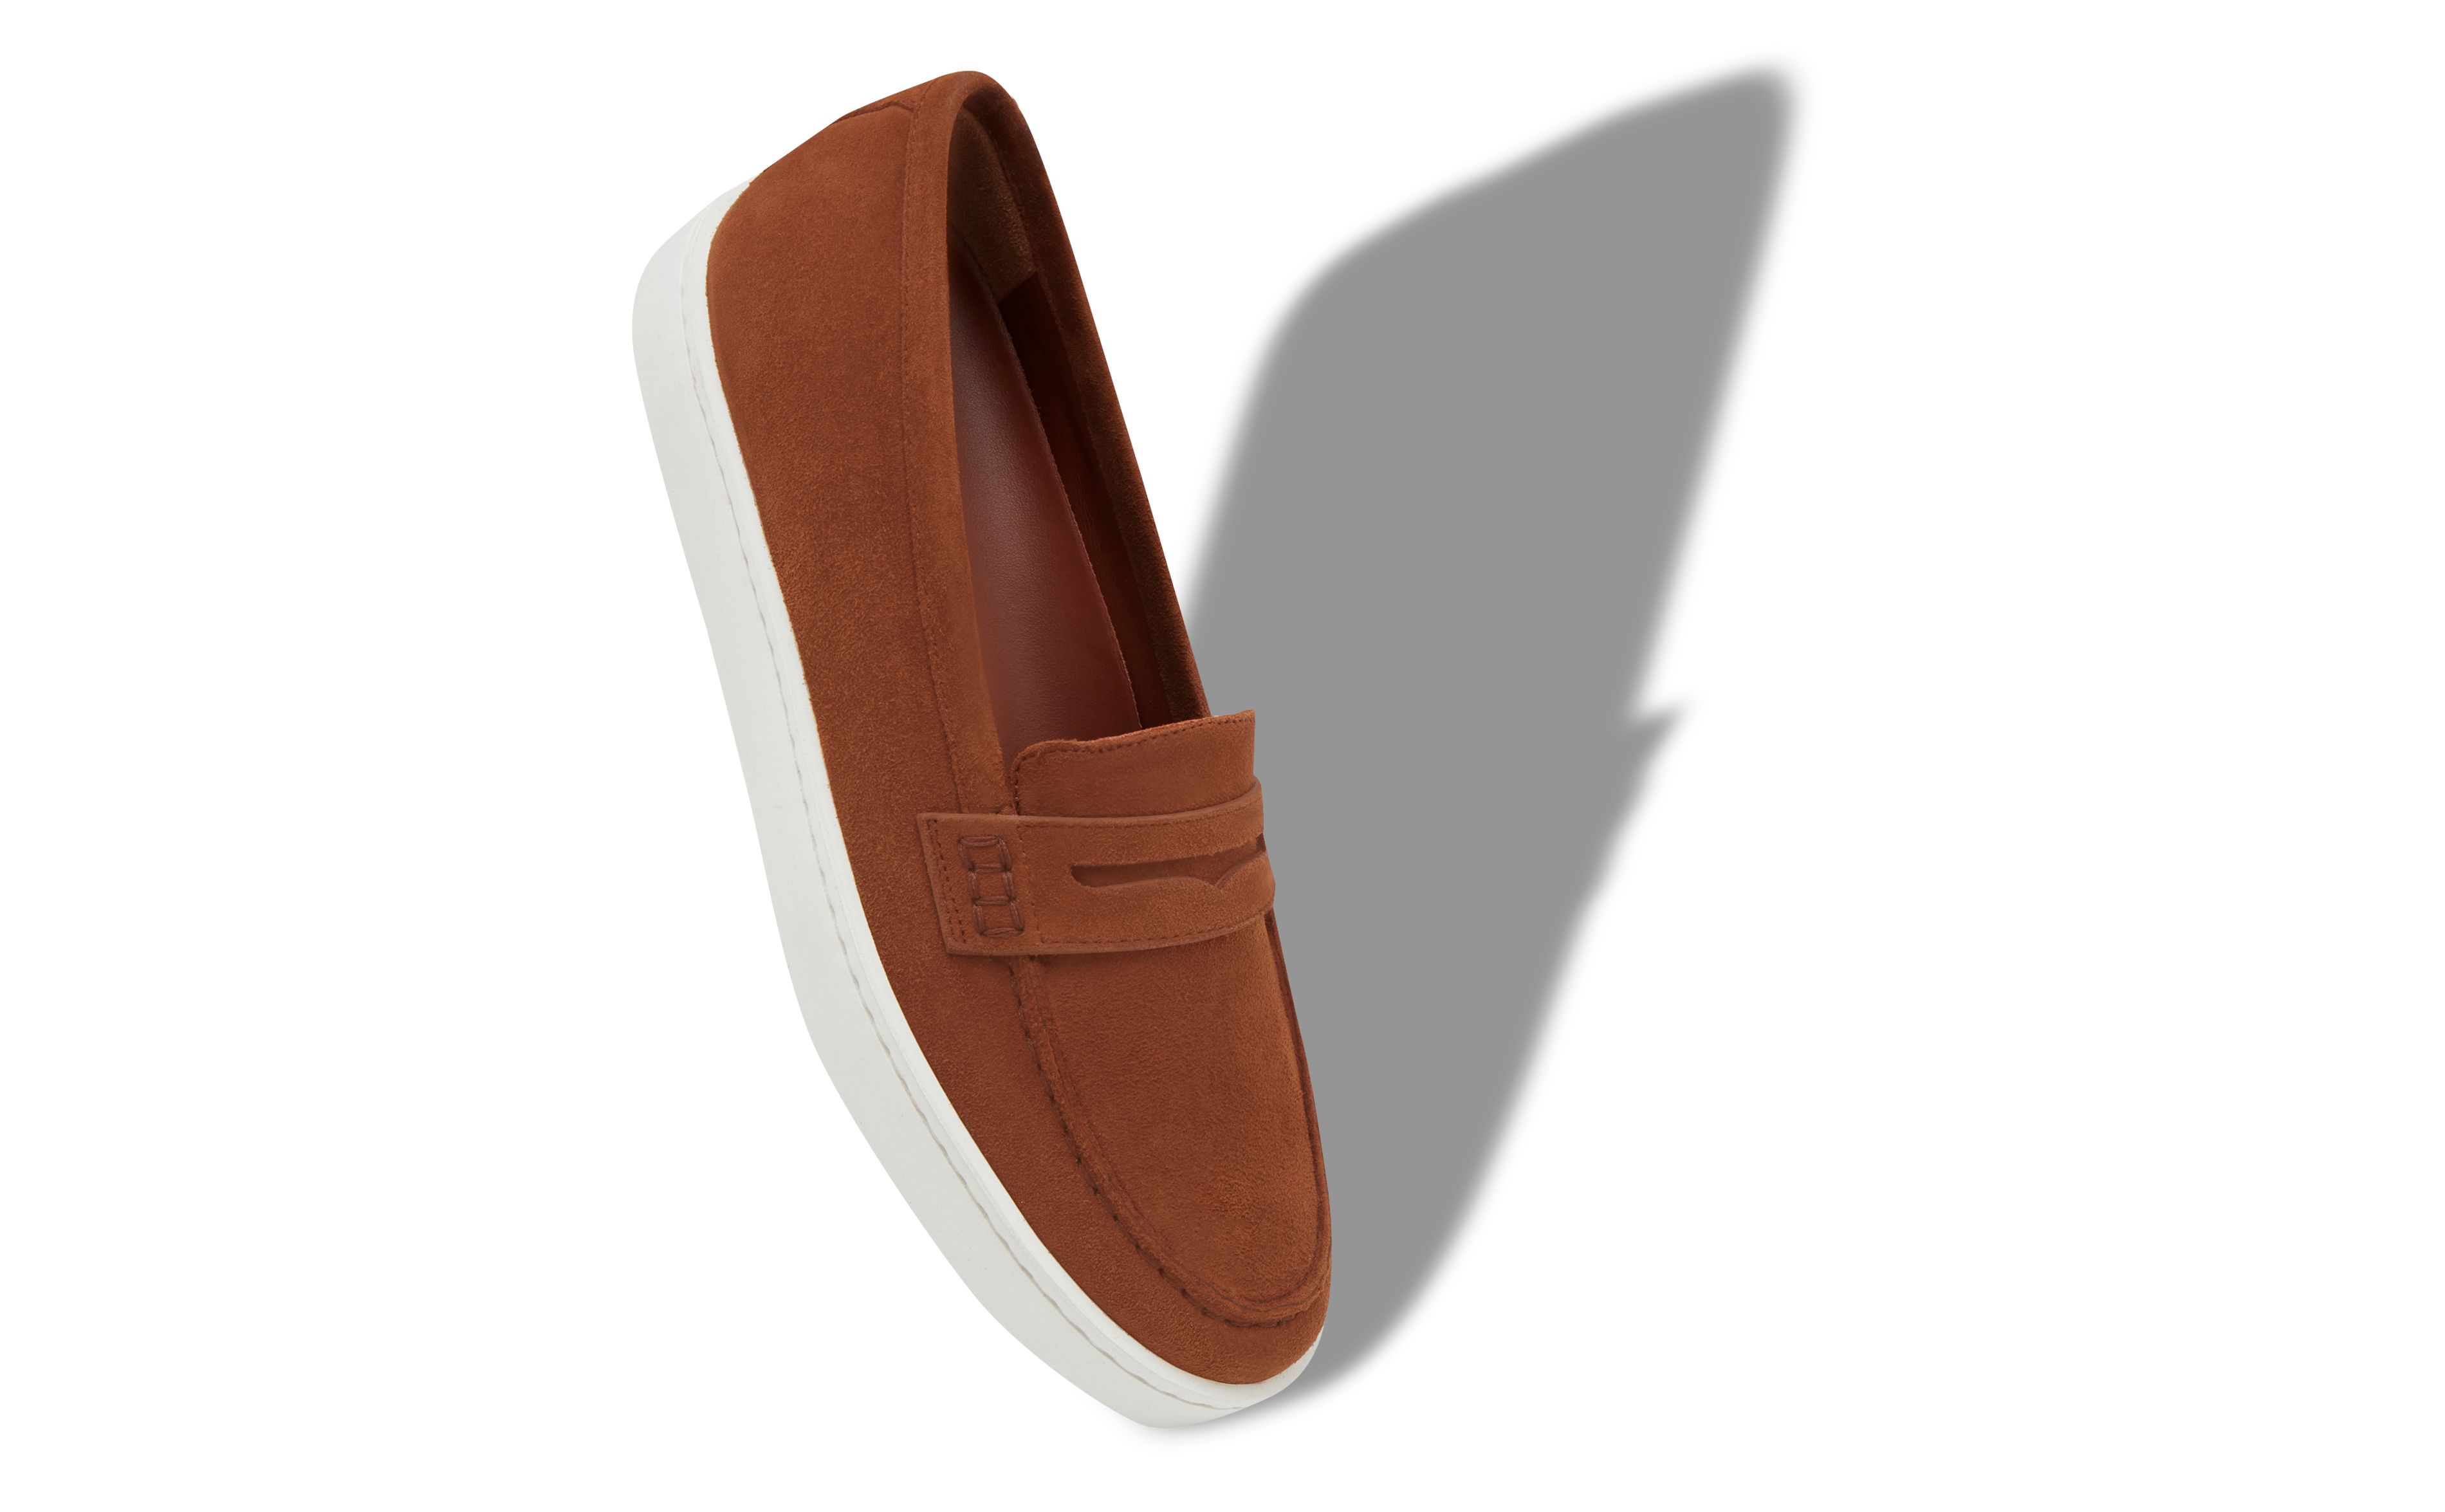 Designer Brown Suede Penny Loafers - Image Main